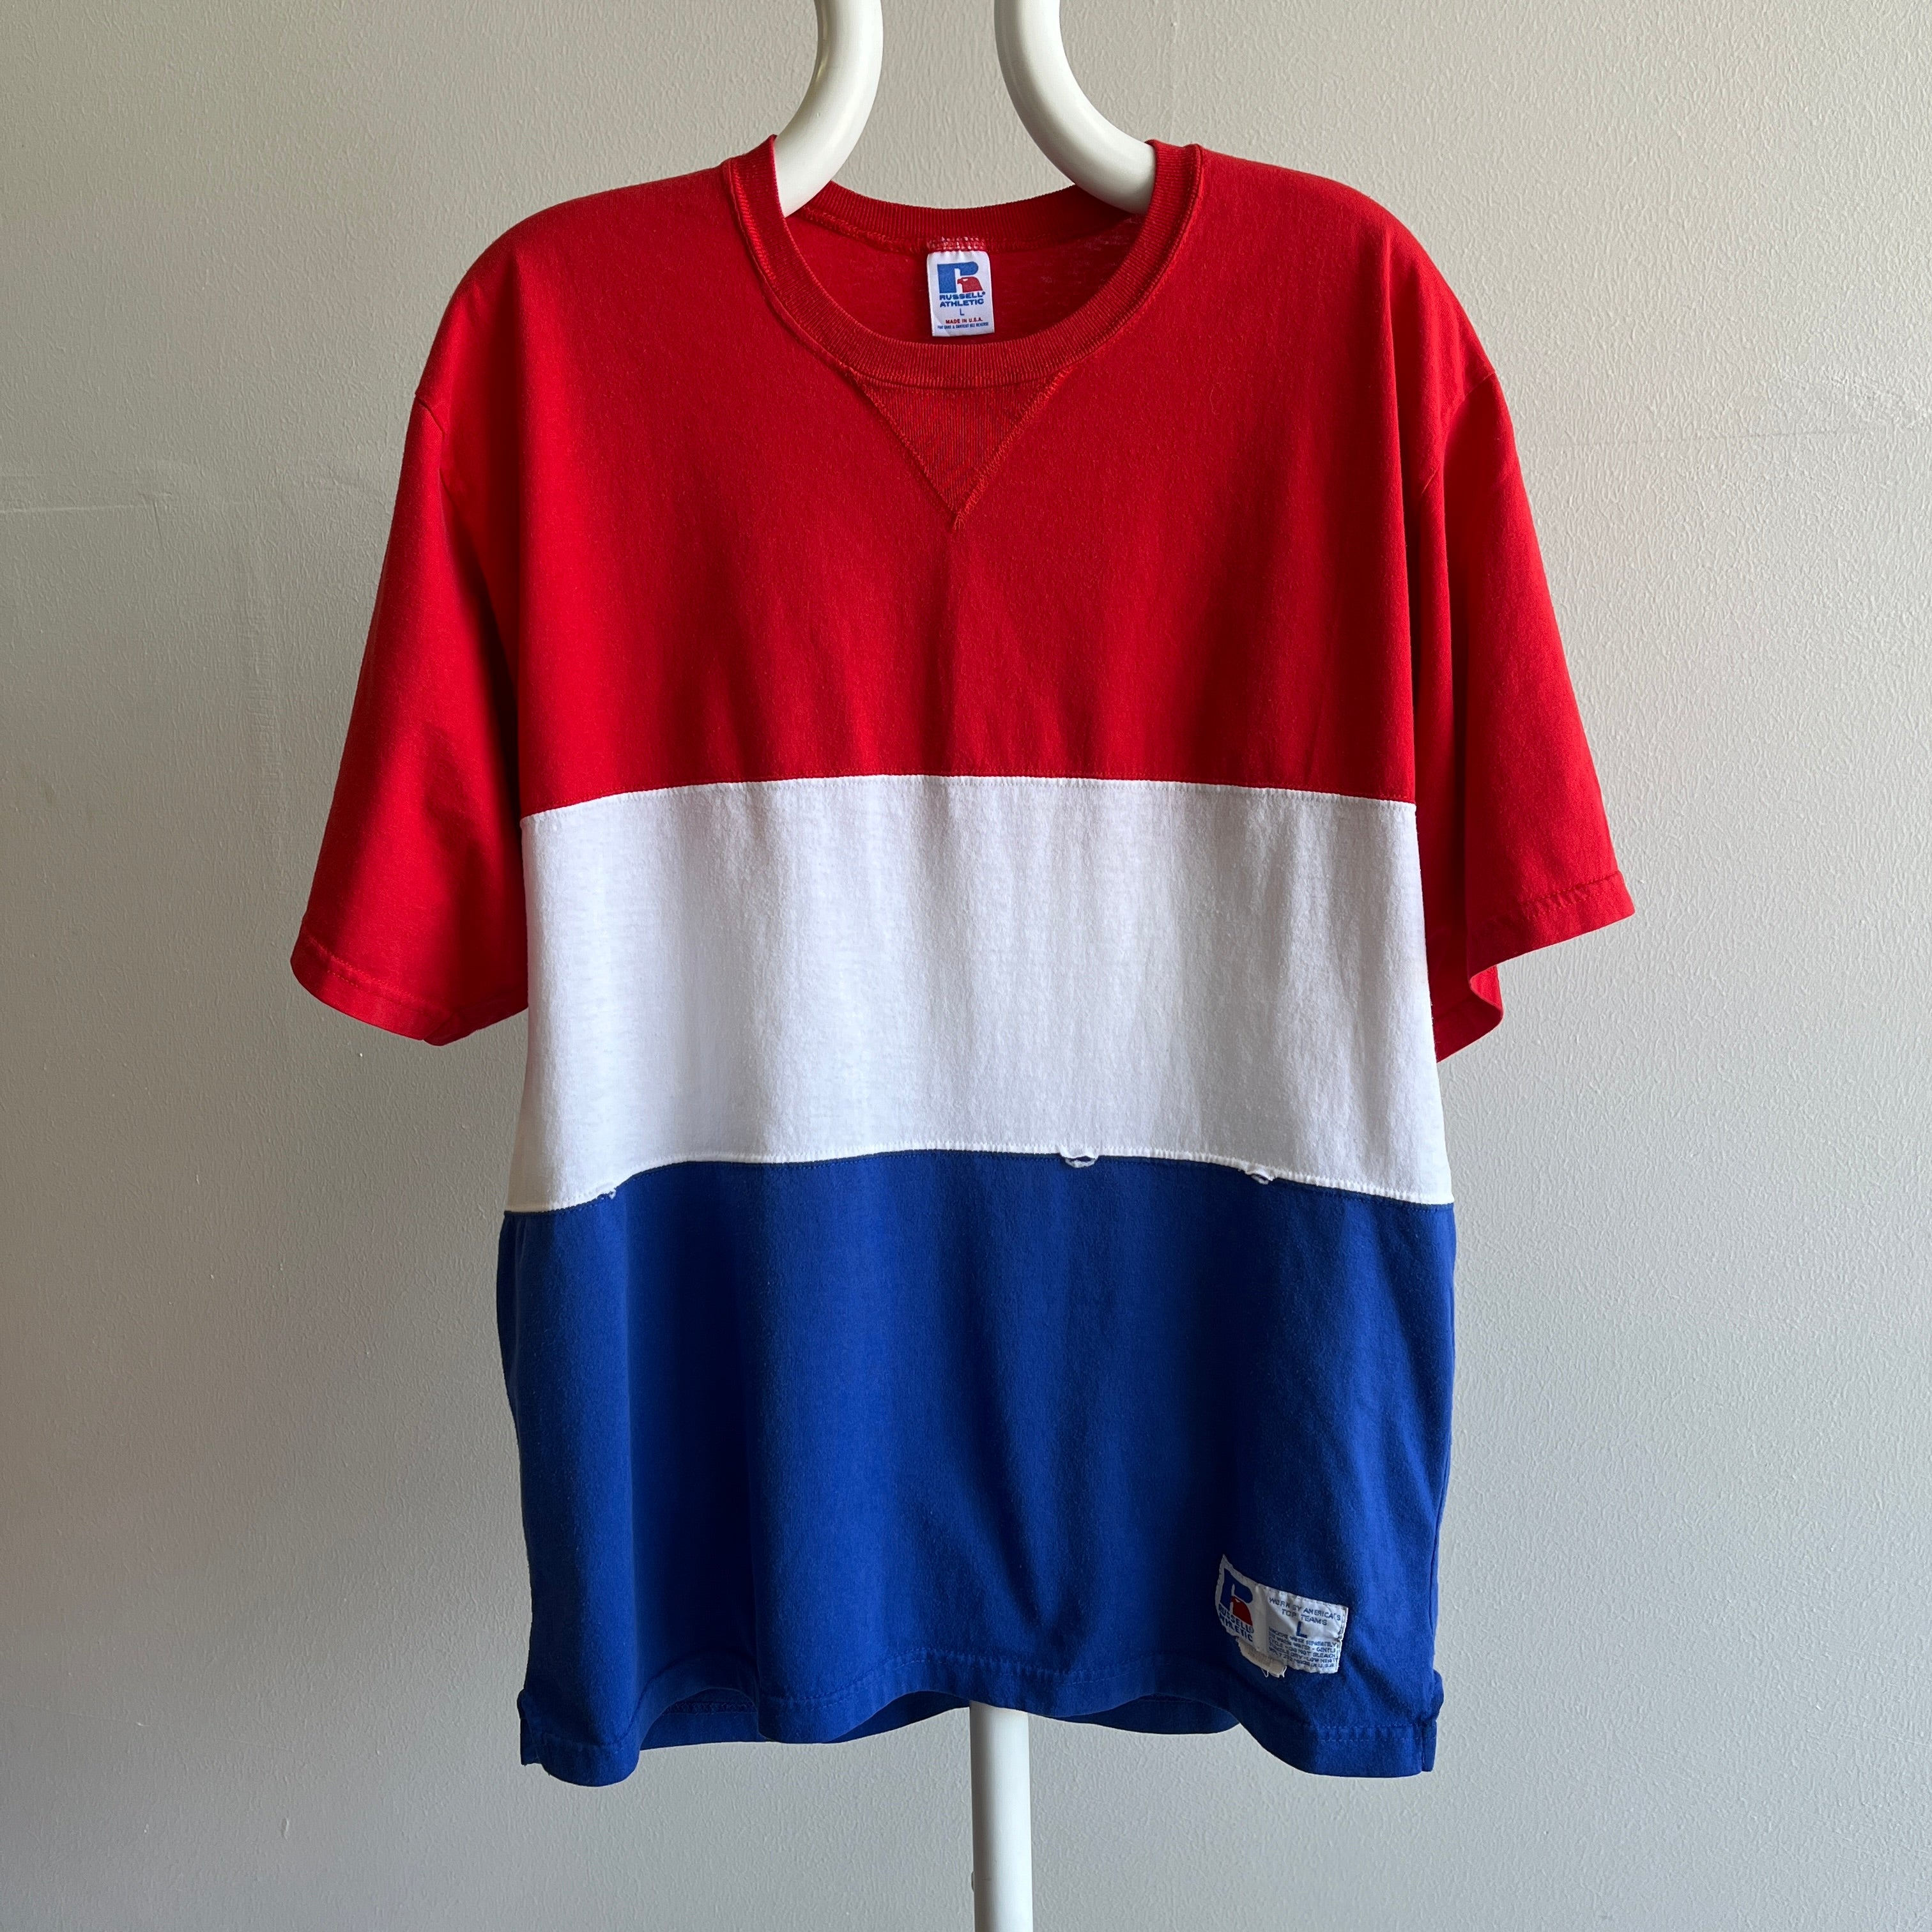 GG 1980s Red, White and Blue T-Shirt by Russell - CLASSIC